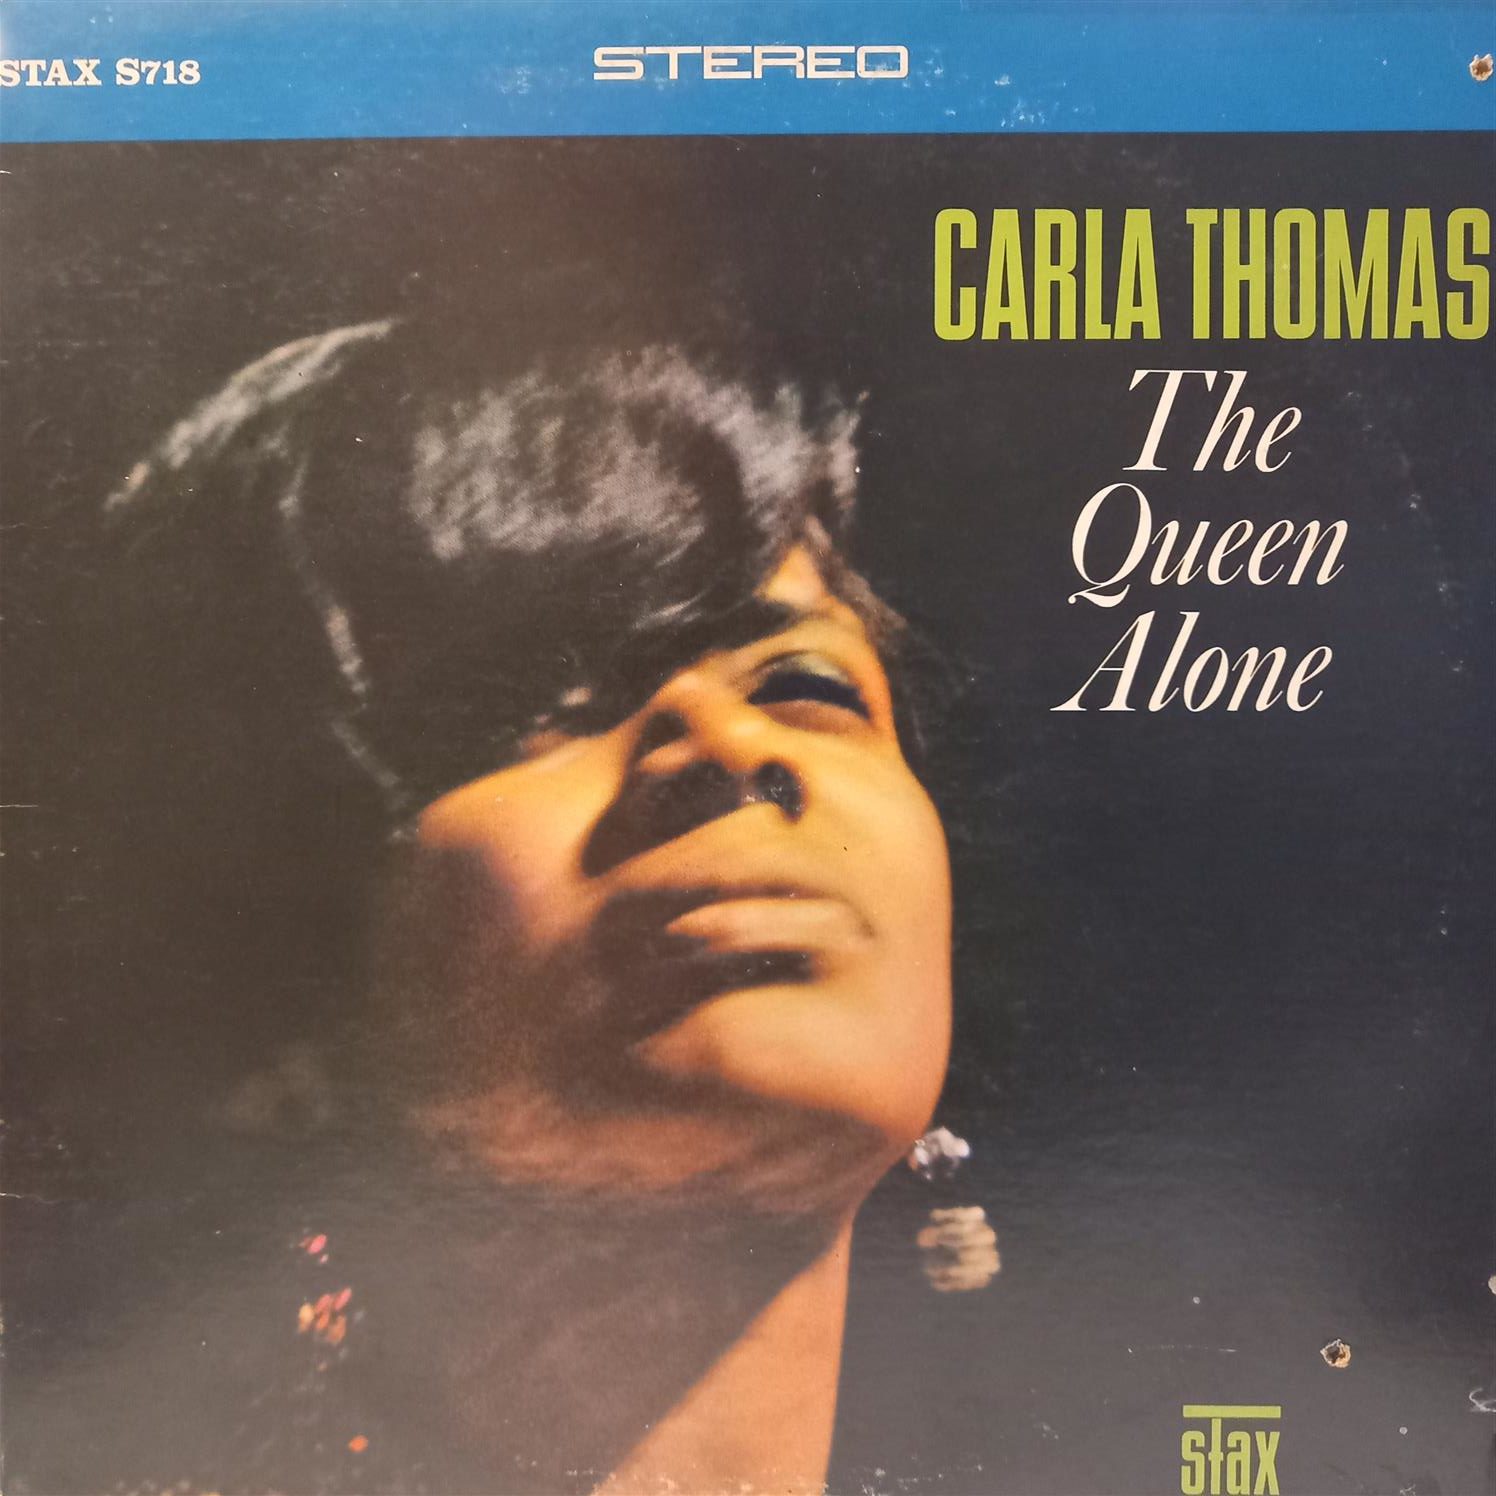 CARLA THOMAS – THE QUEEN ALONE ON